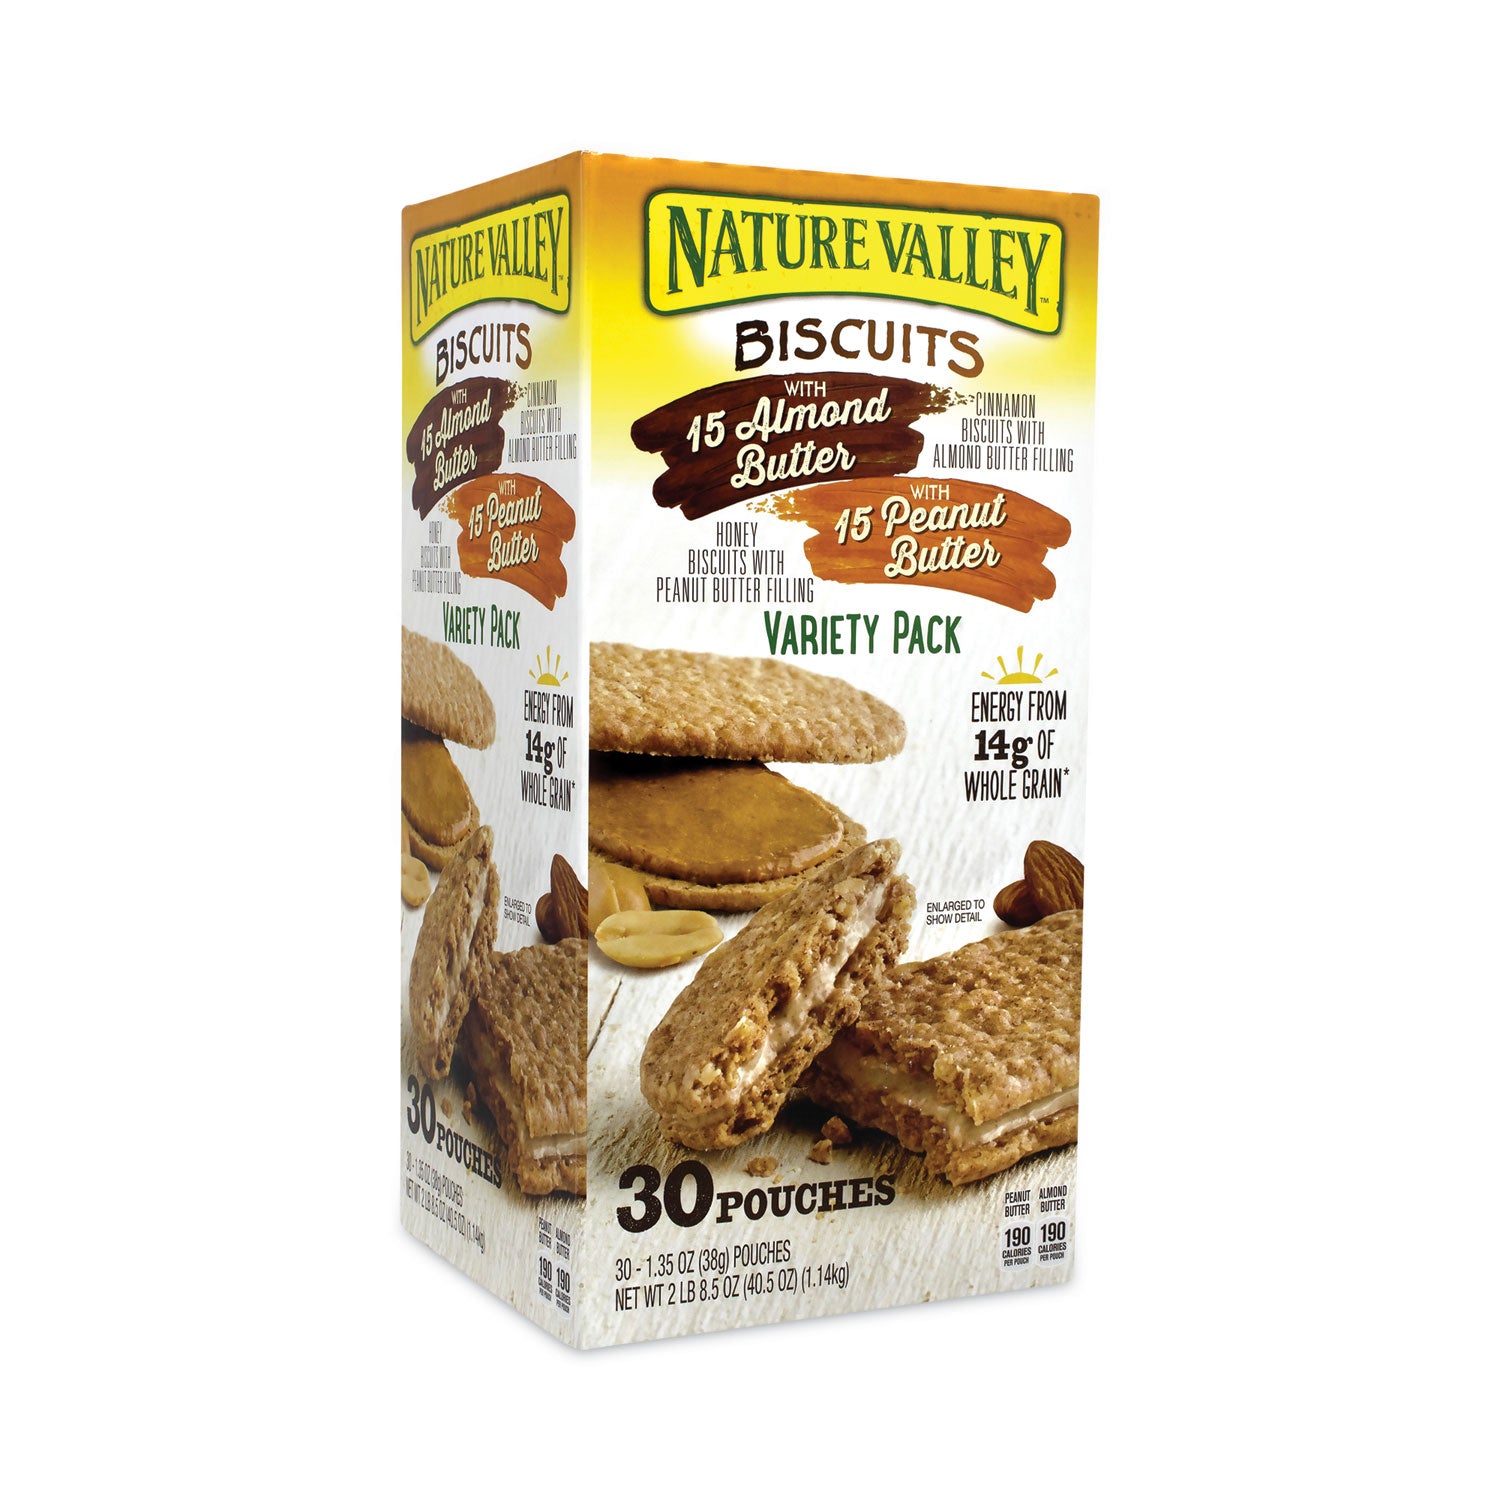 biscuits-cinnamon-with-almond-butter-honey-with-peanut-butter-135-oz-pouch-30-carton-ships-in-1-3-business-days_grr22001046 - 1